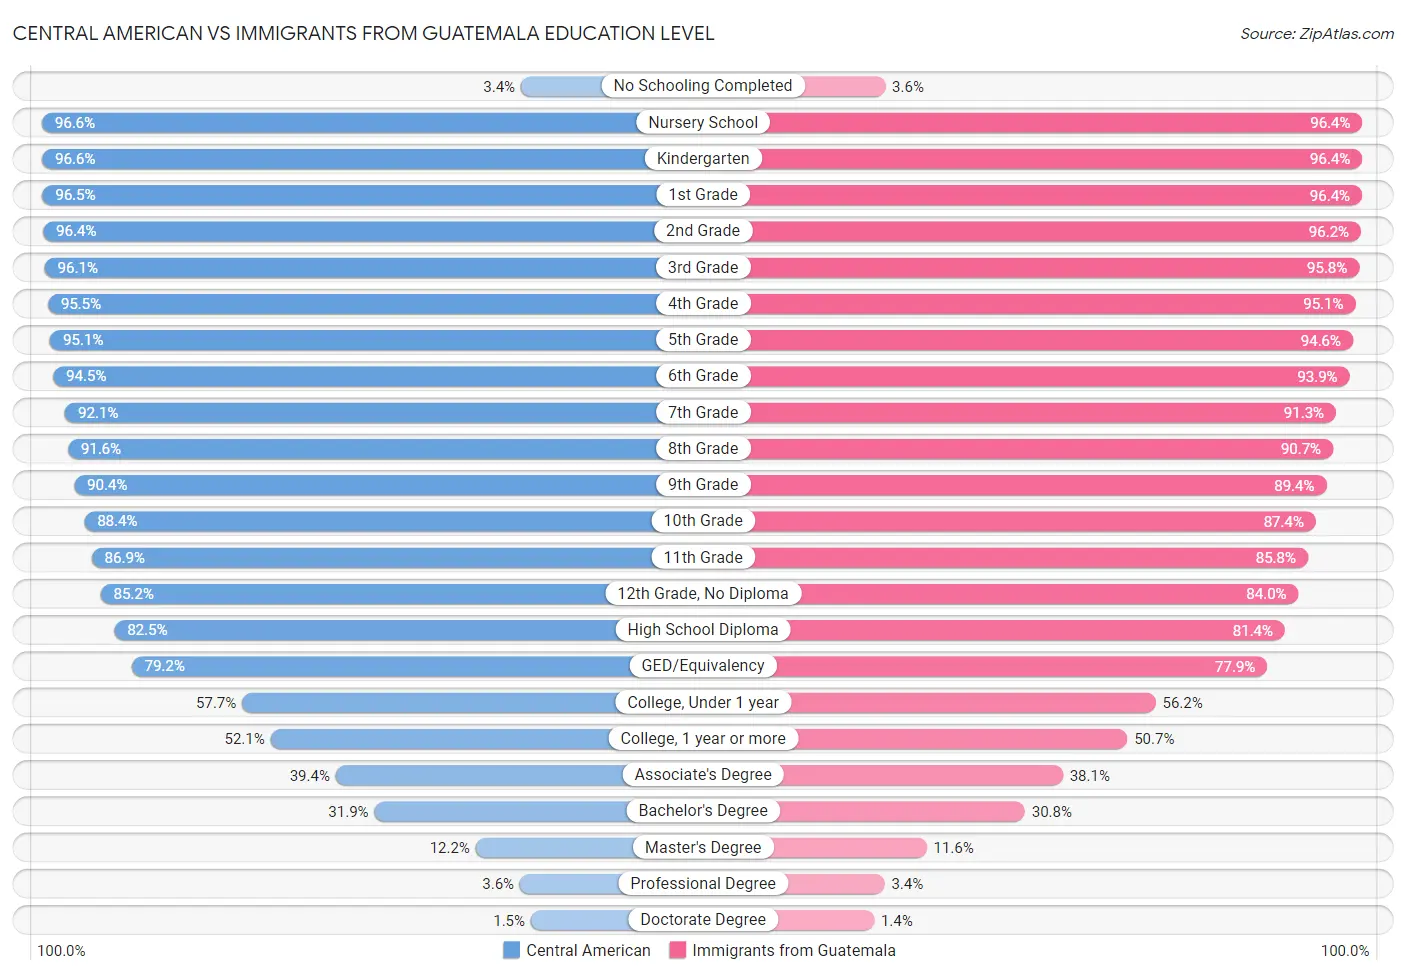 Central American vs Immigrants from Guatemala Education Level